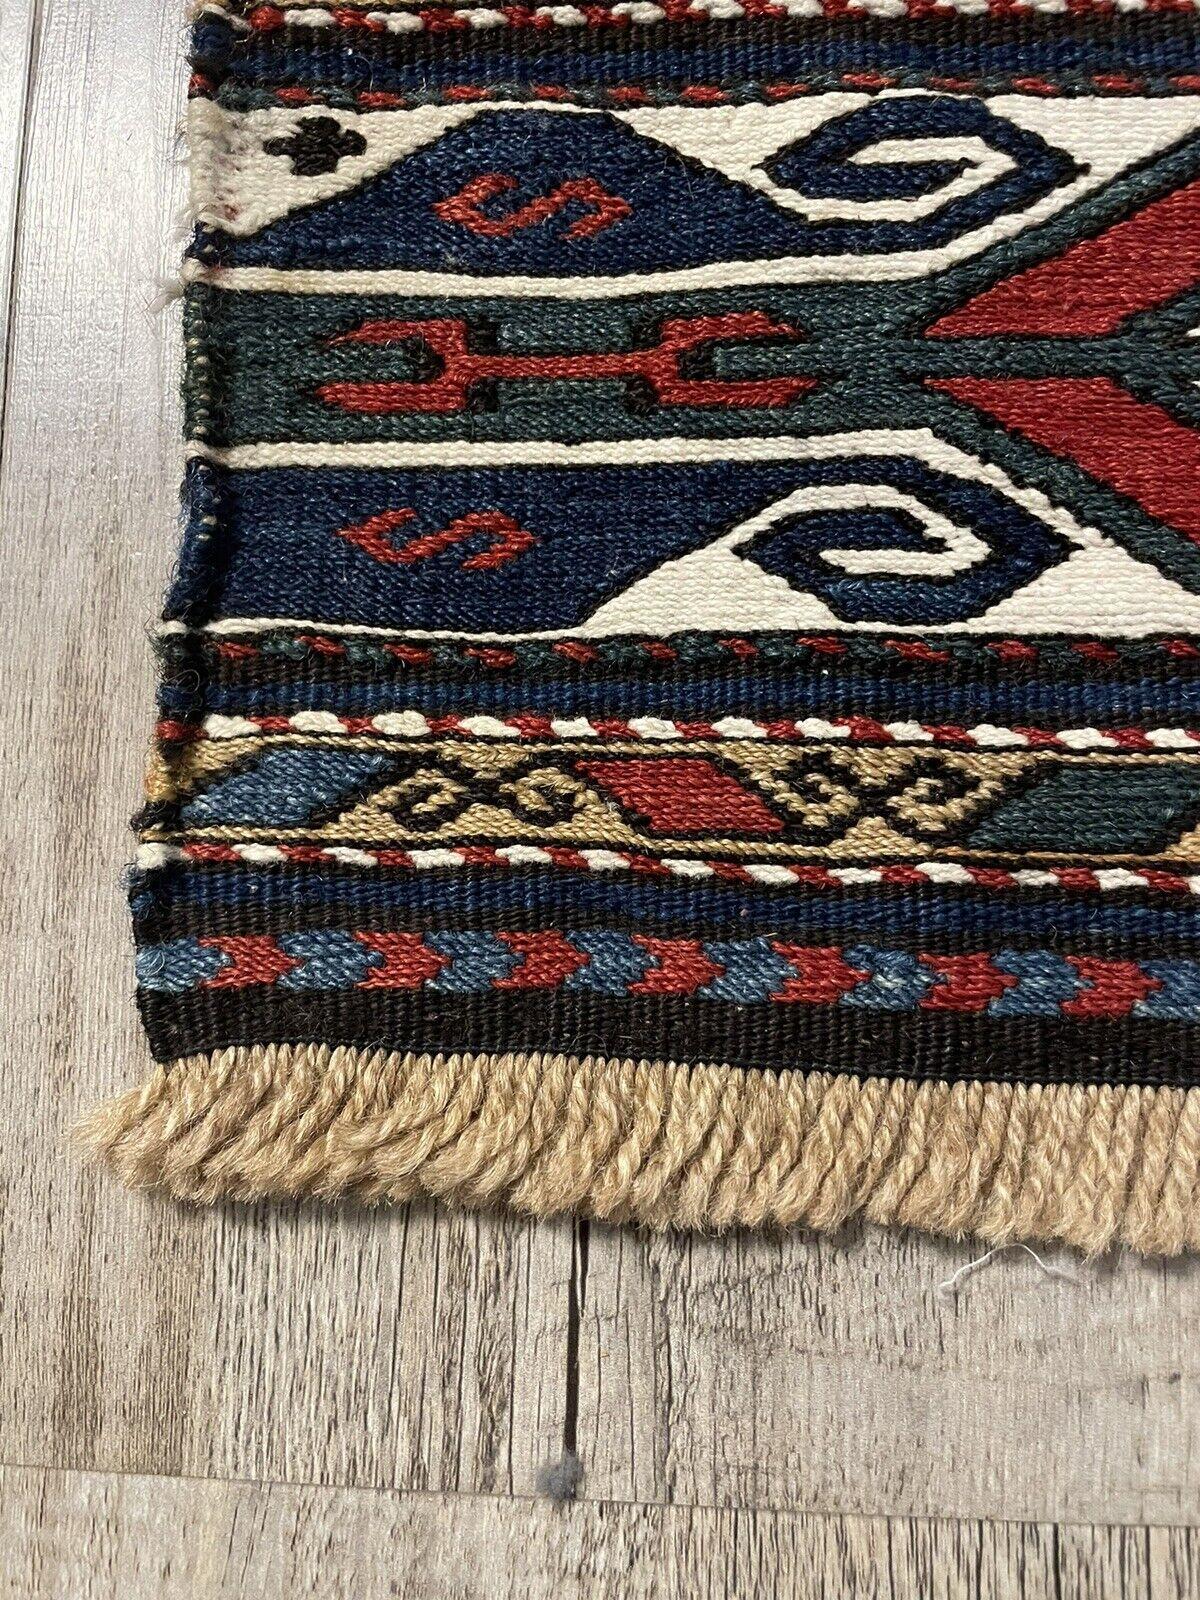 Handmade Antique Persian Style Sumak Collectible Kilim 1.3' x 1.8, 1900s - 1N04 In Good Condition For Sale In Bordeaux, FR